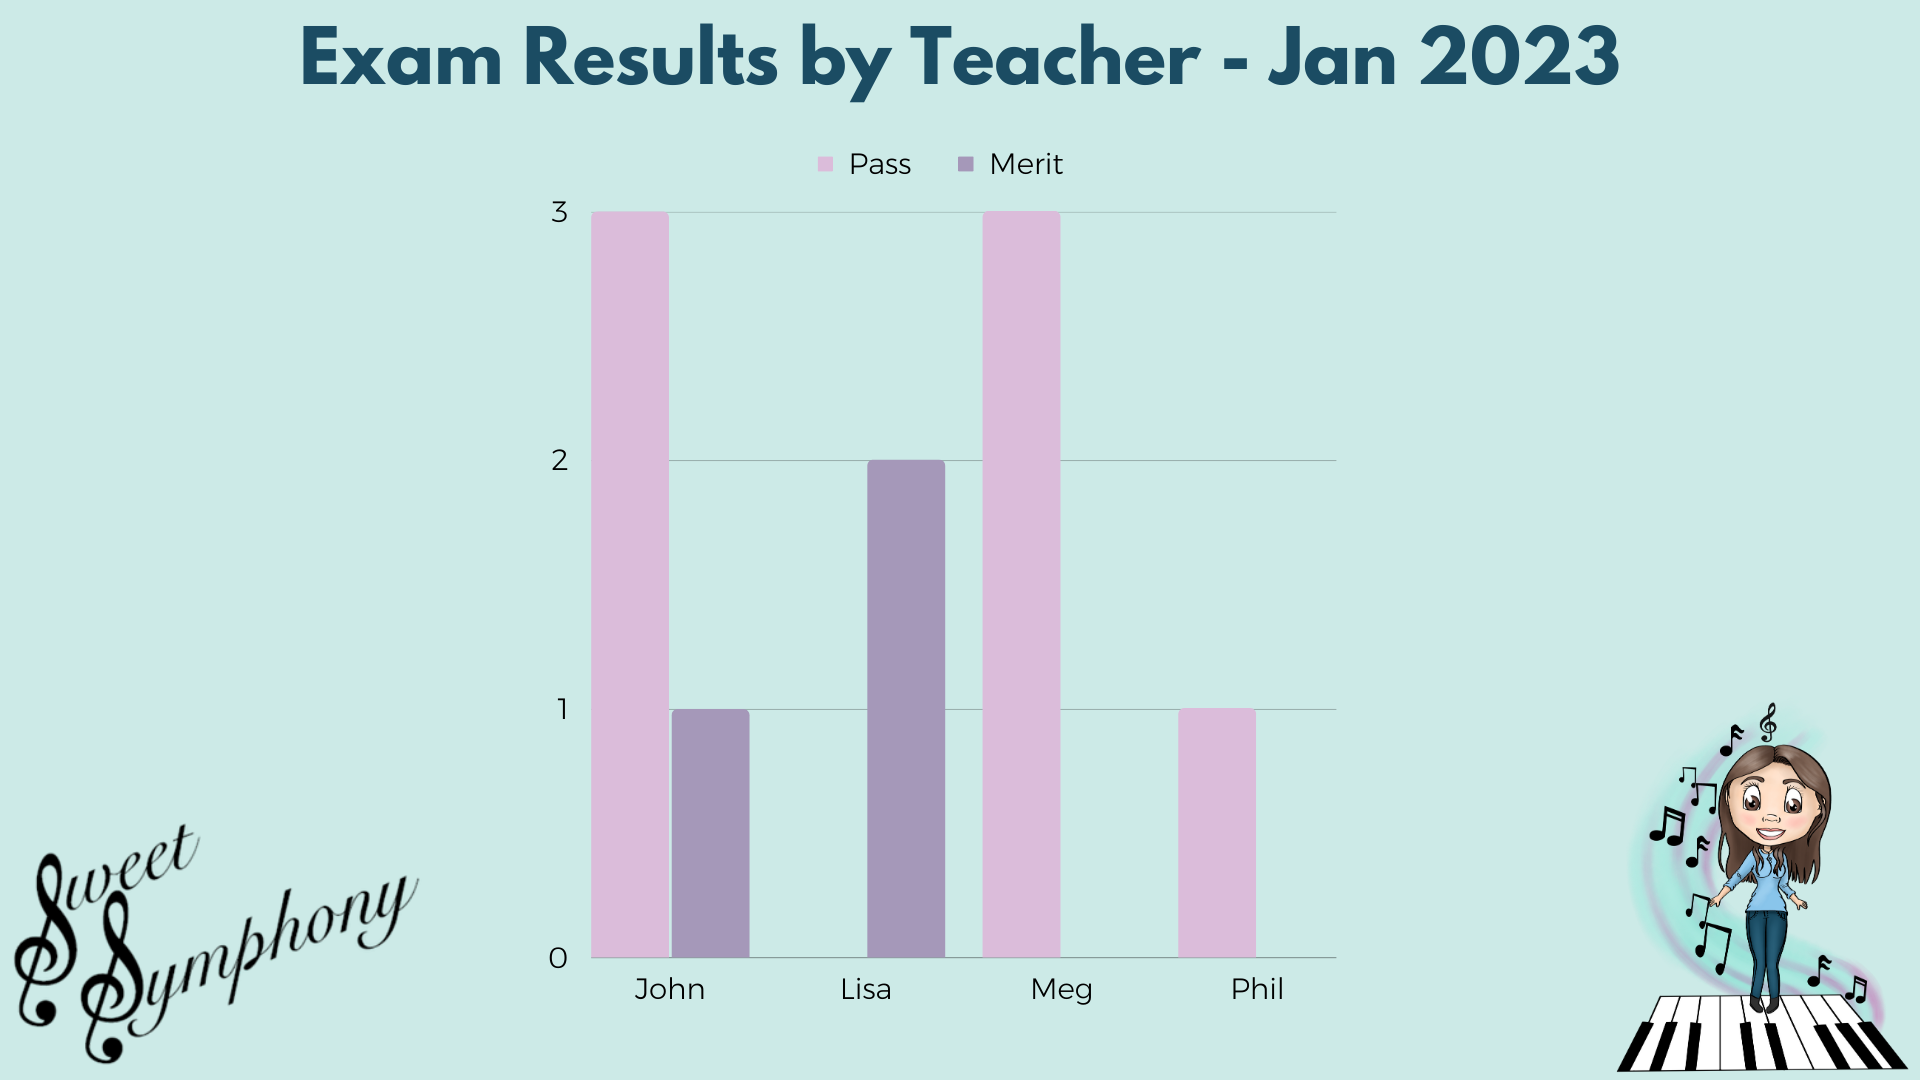 Sweet Symphony's January 2023 Exam Results according to Teacher.